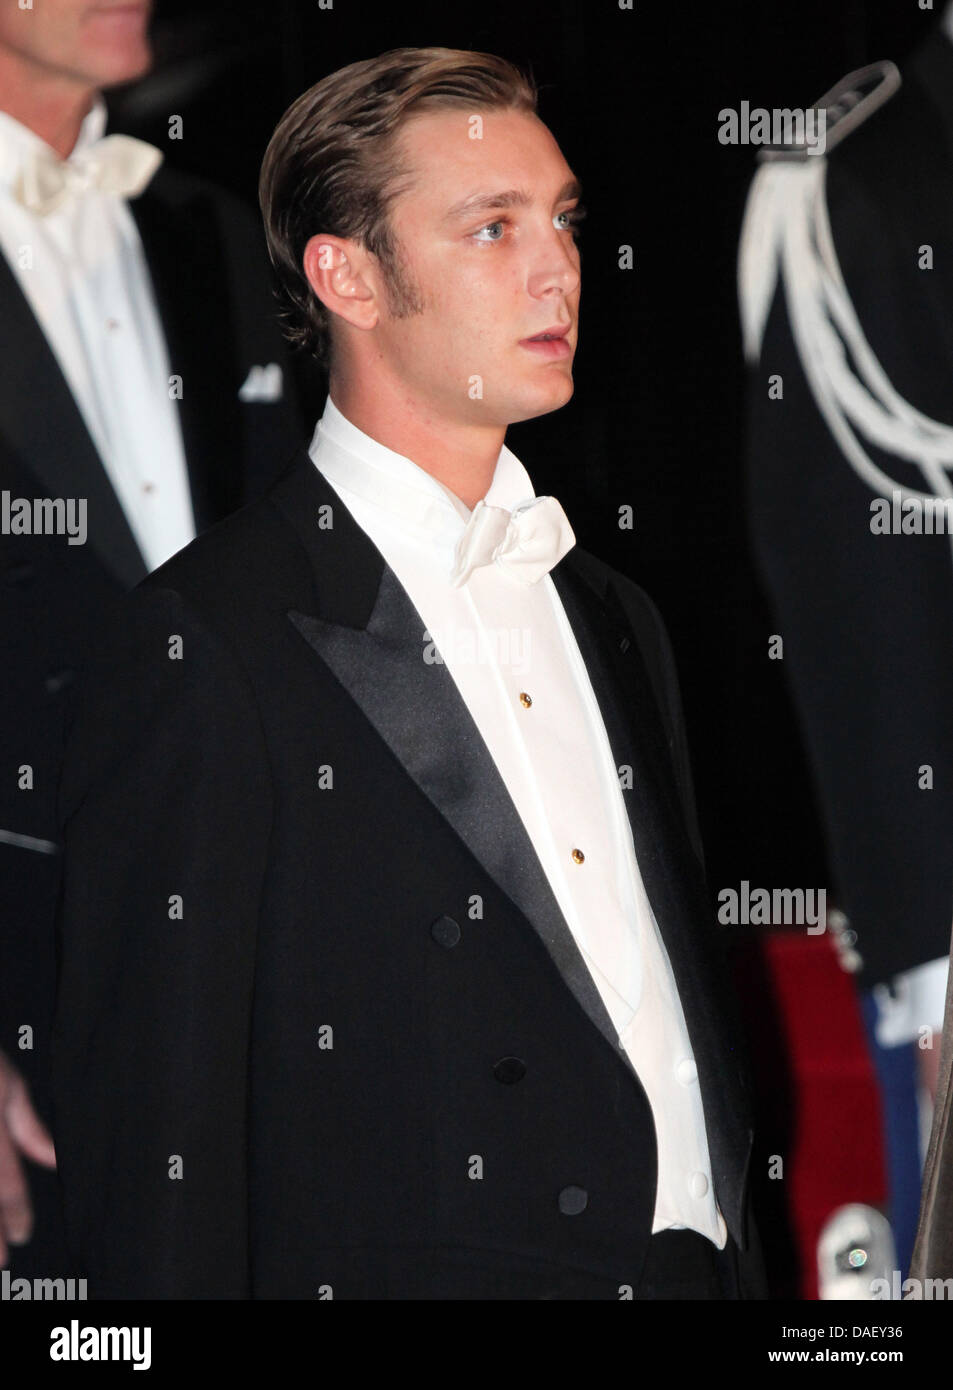 Pierre Casiraghi attends the gala evening at the end of the Monaco National Day at the Grimaldi Forum in Monte Carlo, Monaco, 19 November 2011. Photo: Albert Nieboer / NETHERLANDS OUT Stock Photo